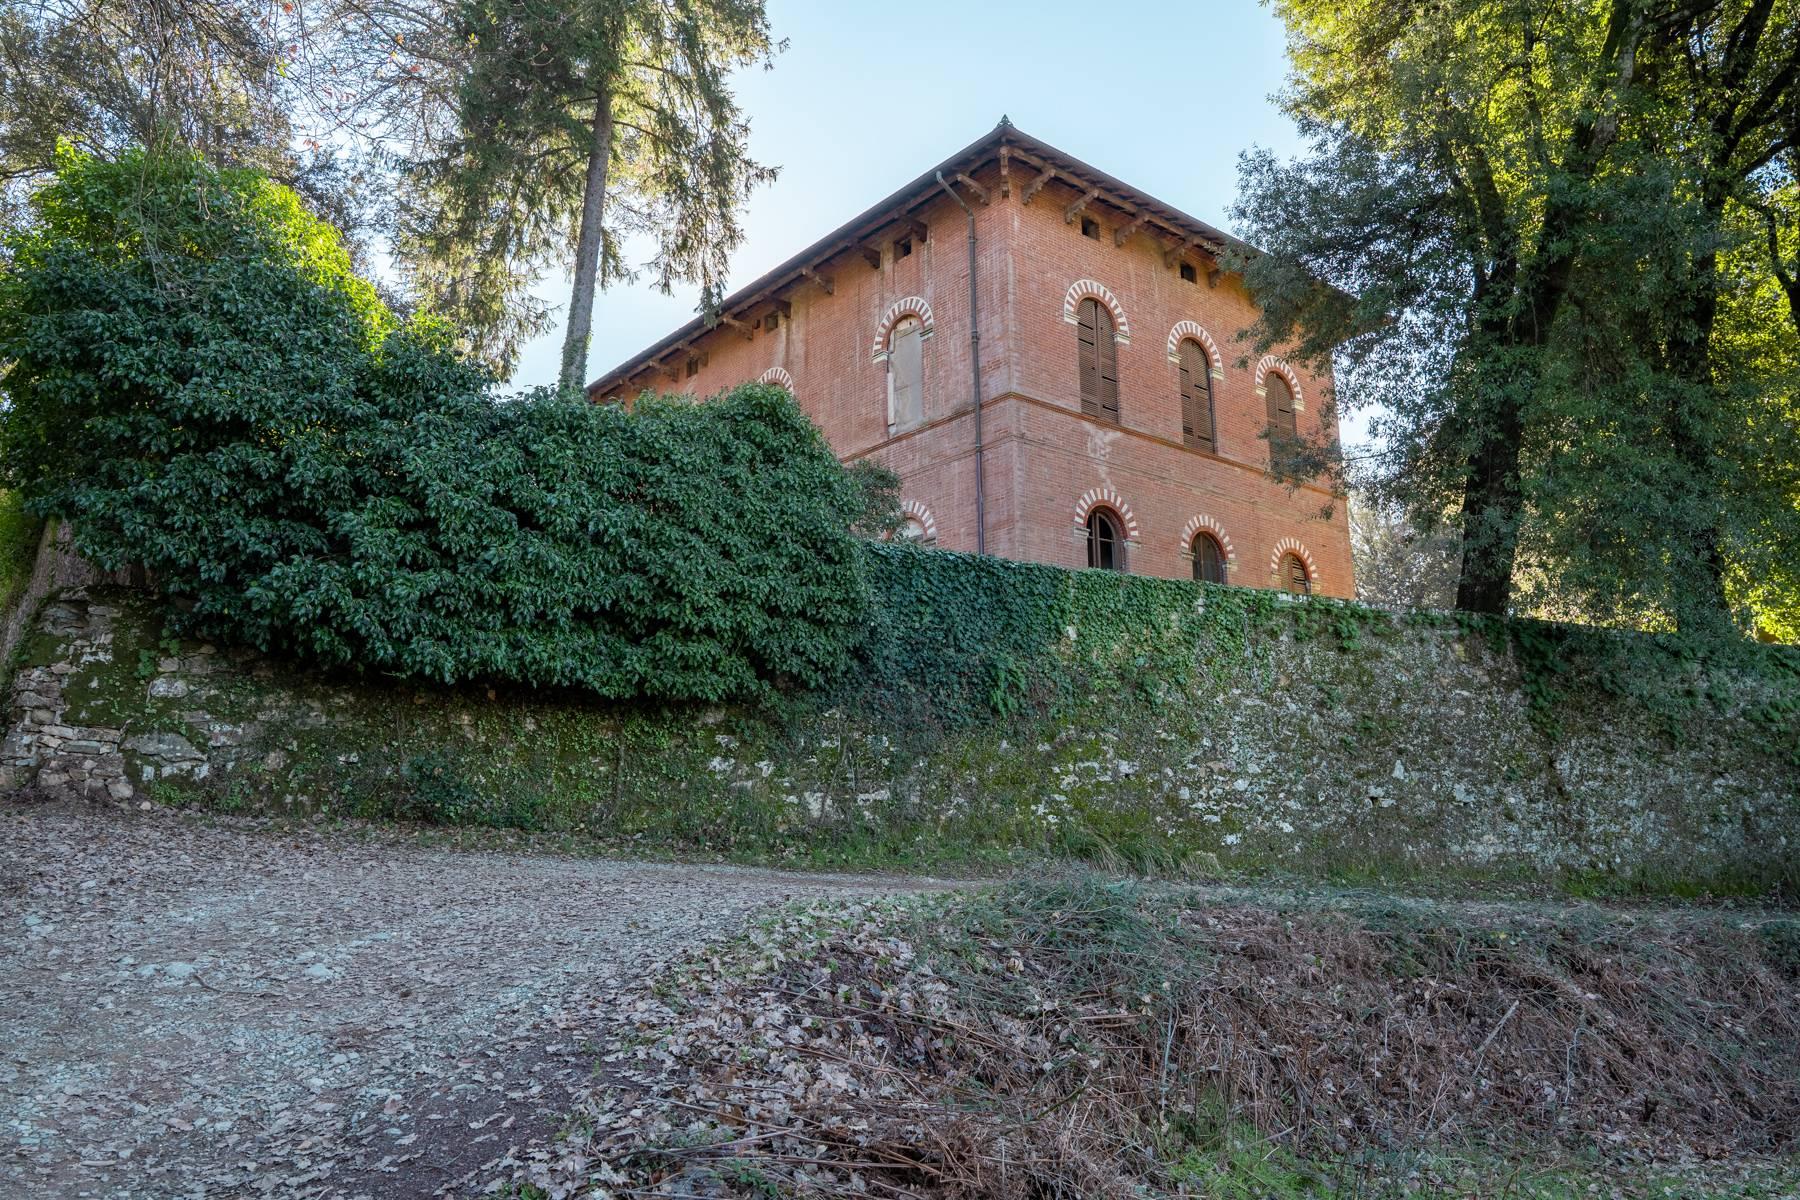 Historical estate of the famous composer G. Puccini - 17